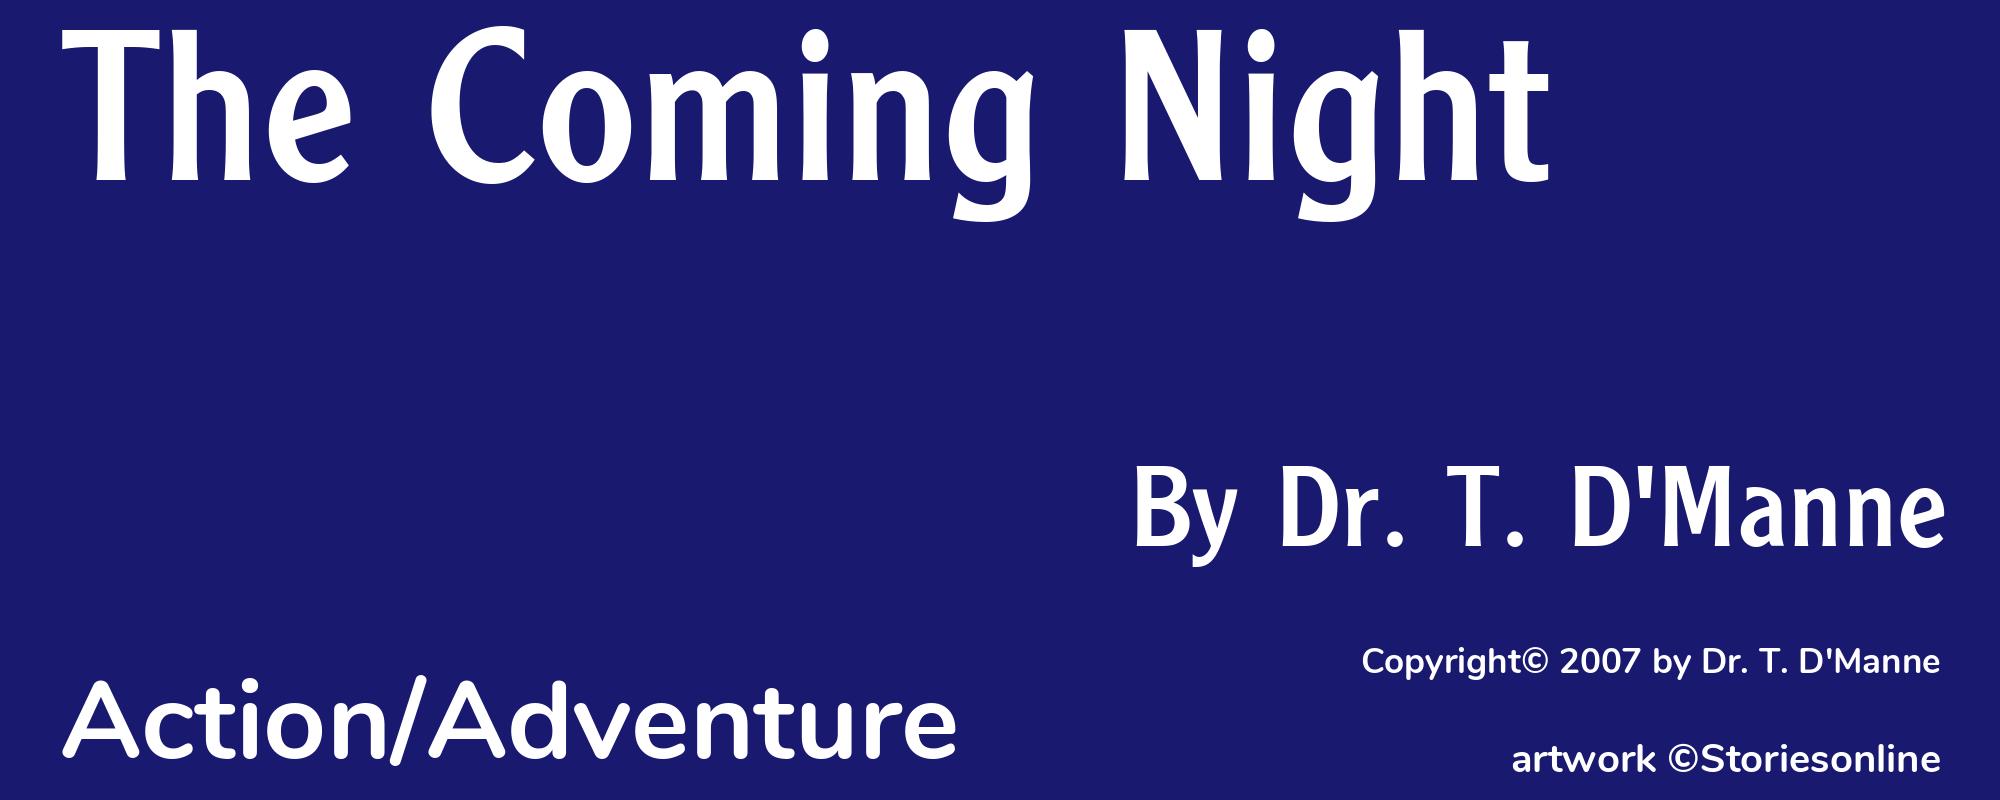 The Coming Night - Cover